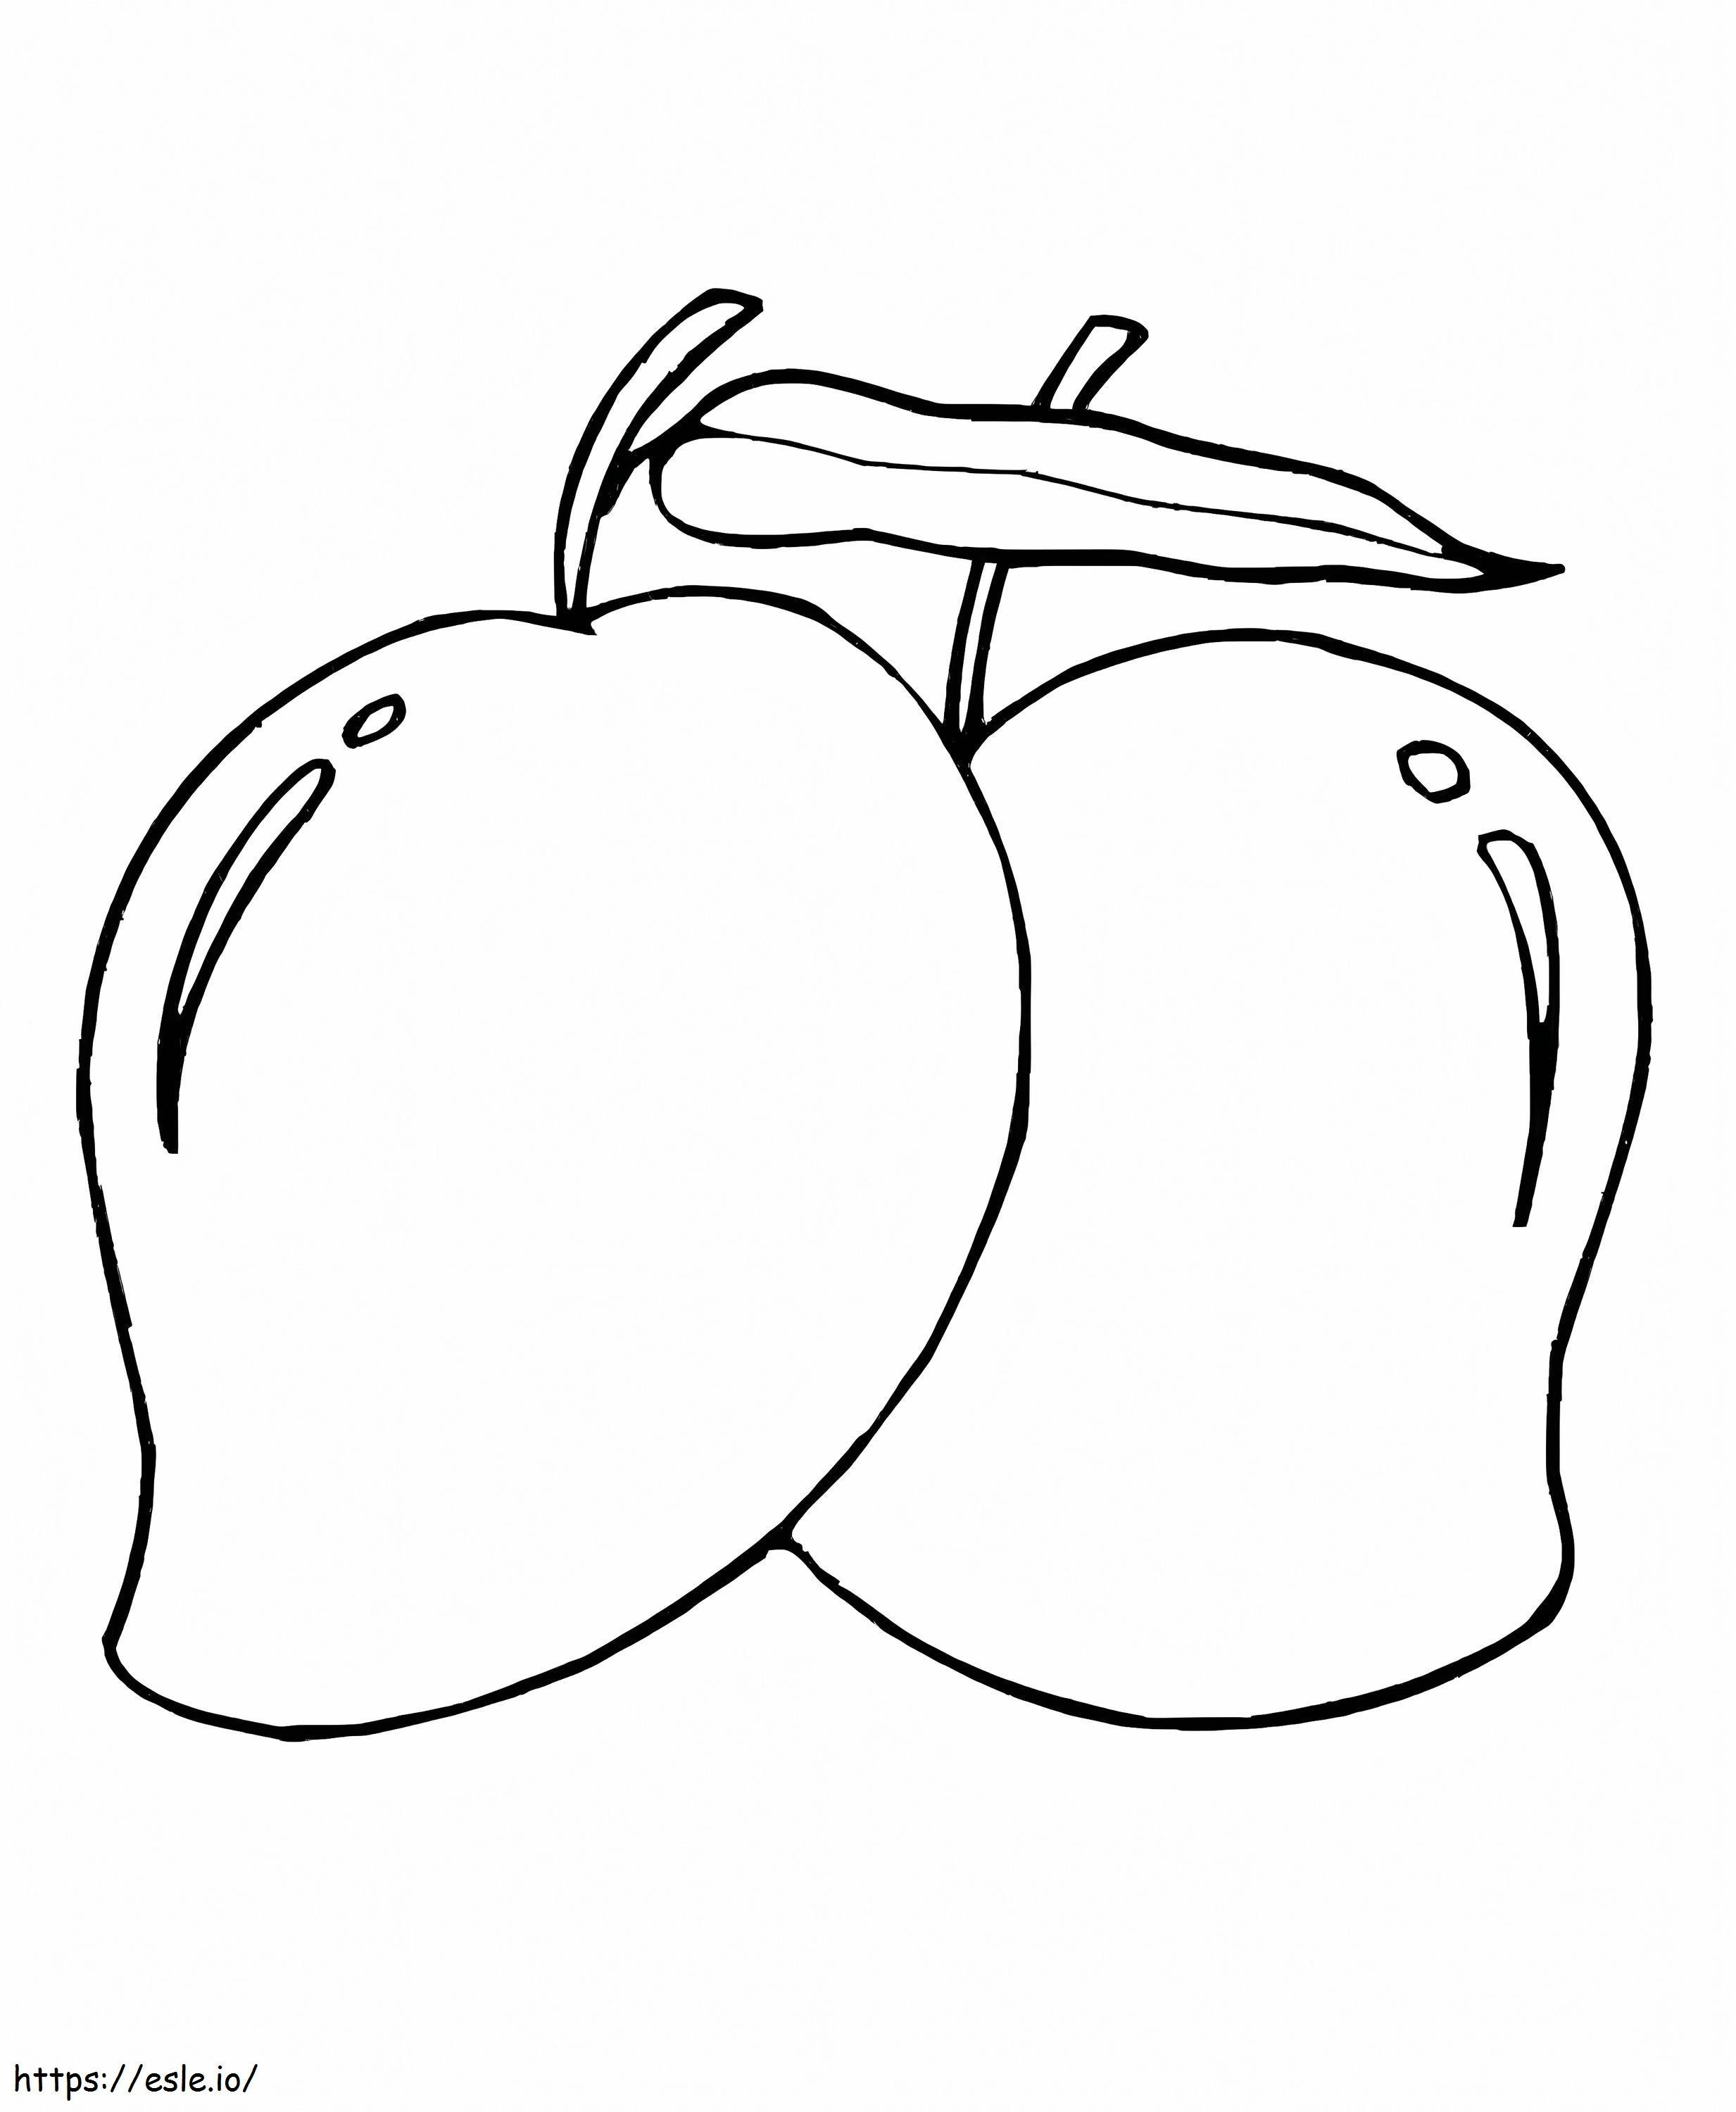 1570581878 Fruit Colouring In Fruit And Vegetables Of Fruits Apple For Of Fruit Fruit Basket Colouring Pictures coloring page